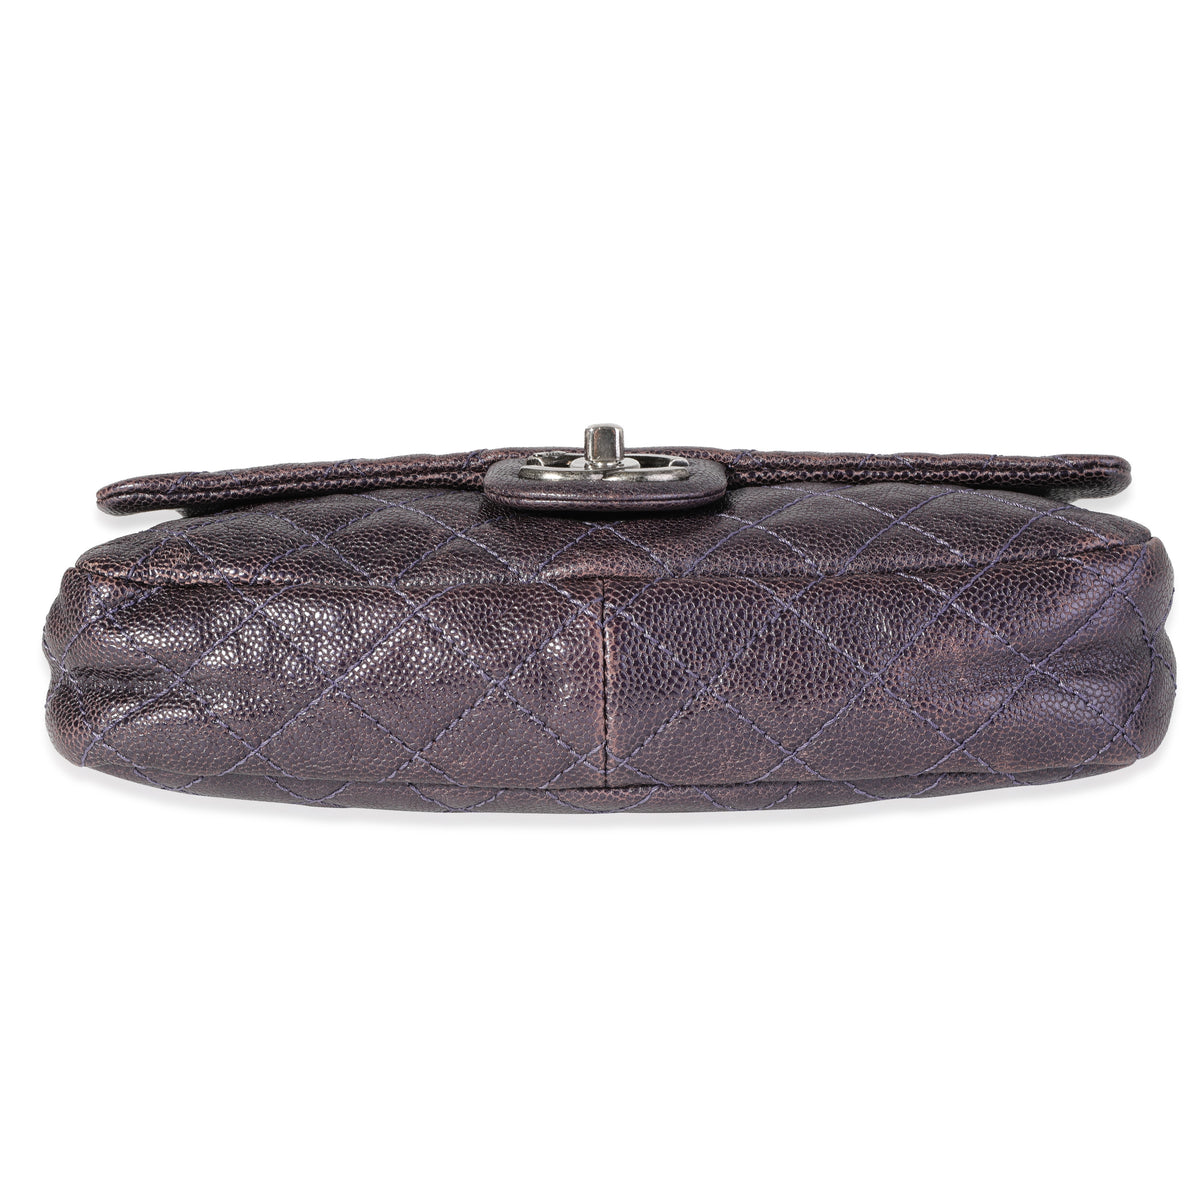 Purple Quilted Caviar Easy Flap Bag